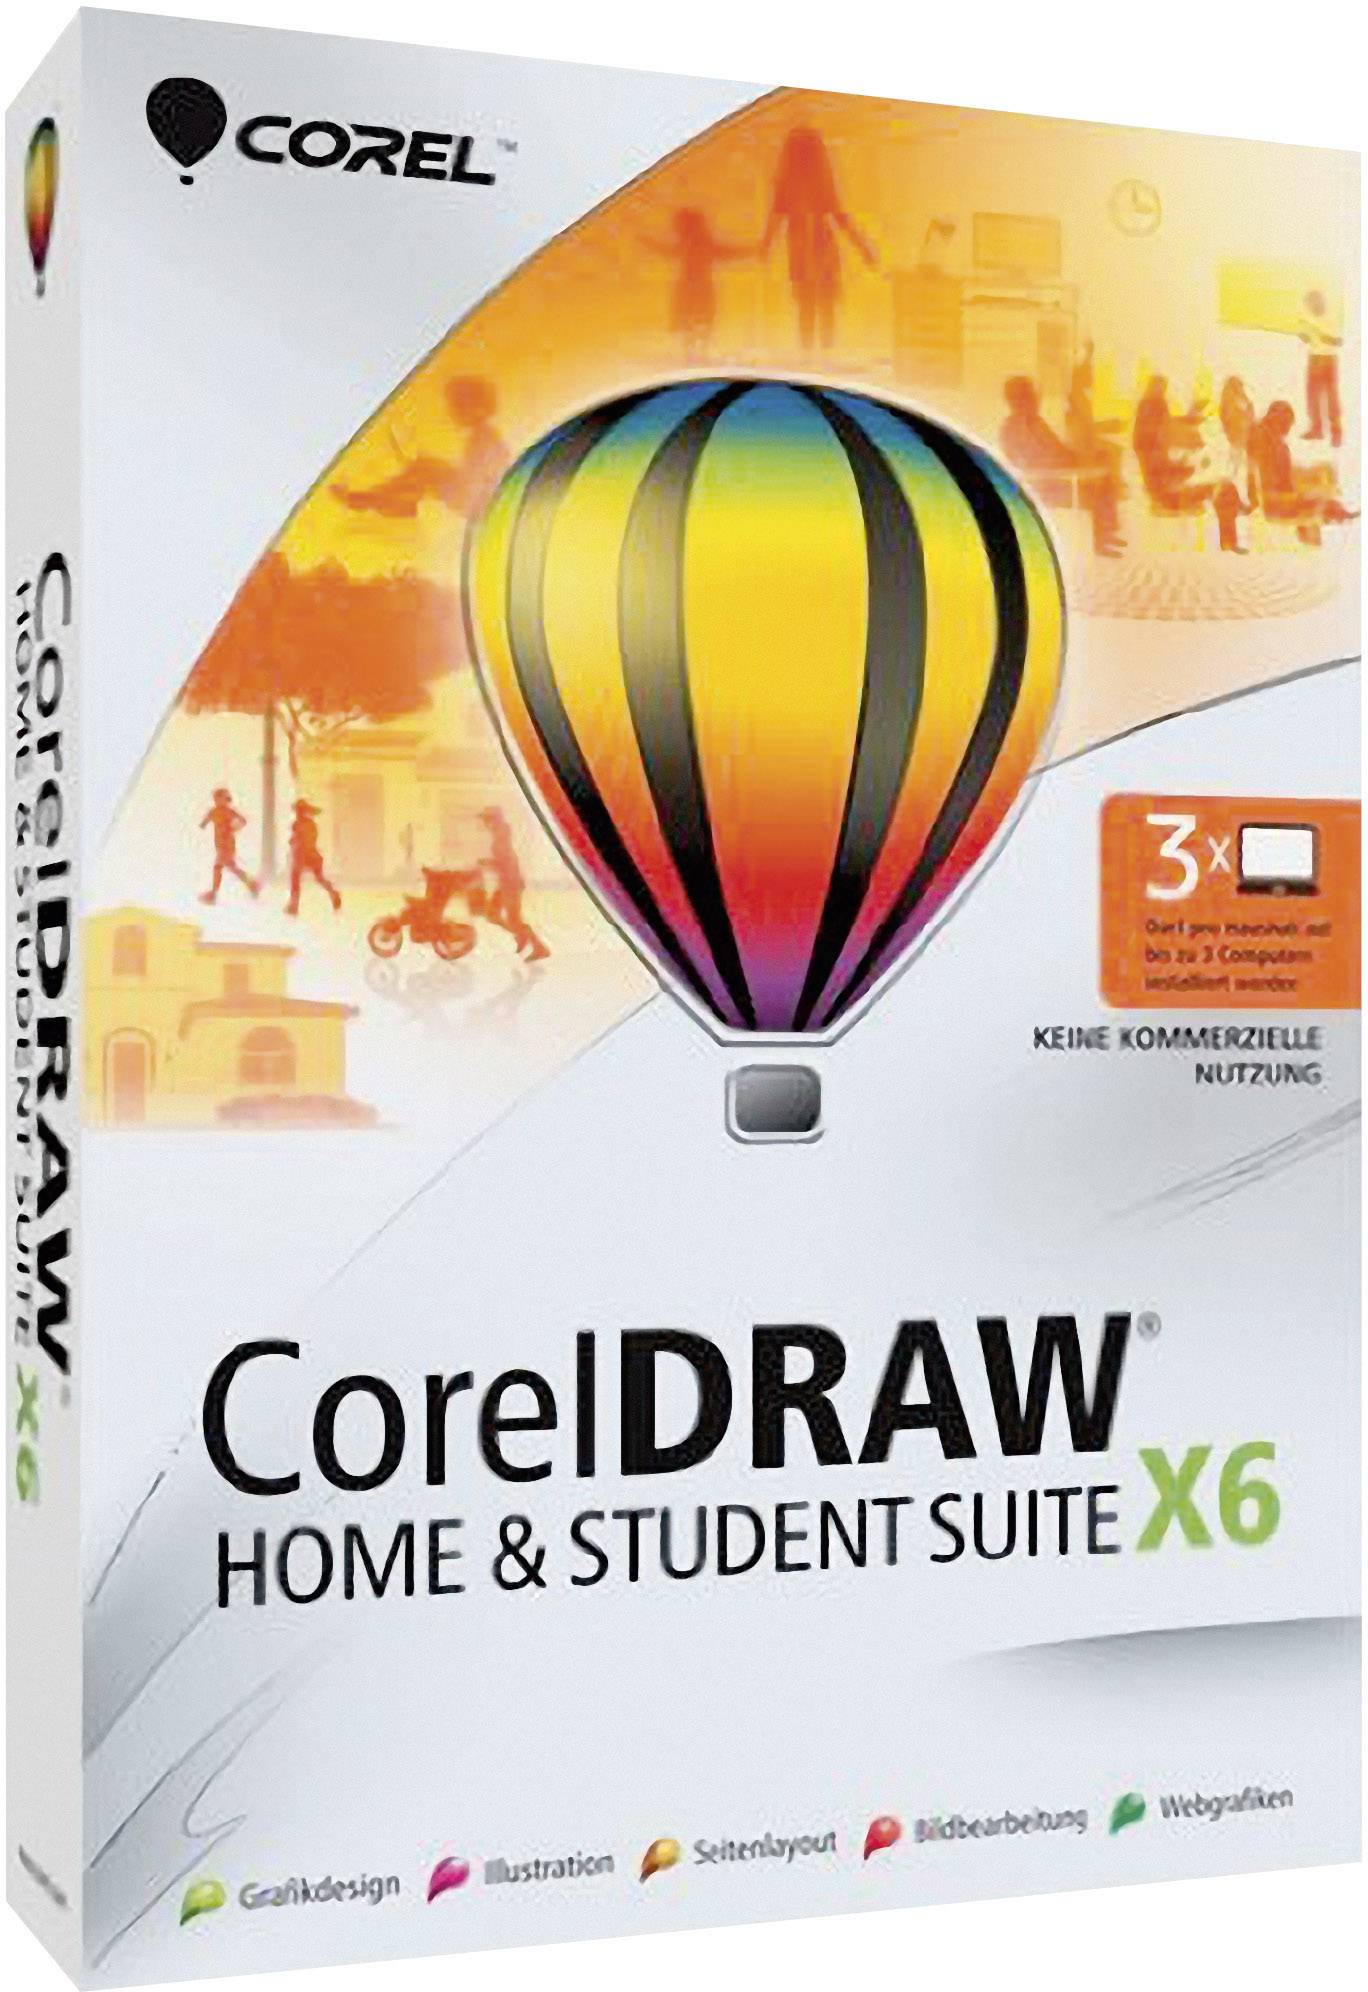 coreldraw x6 home and student review